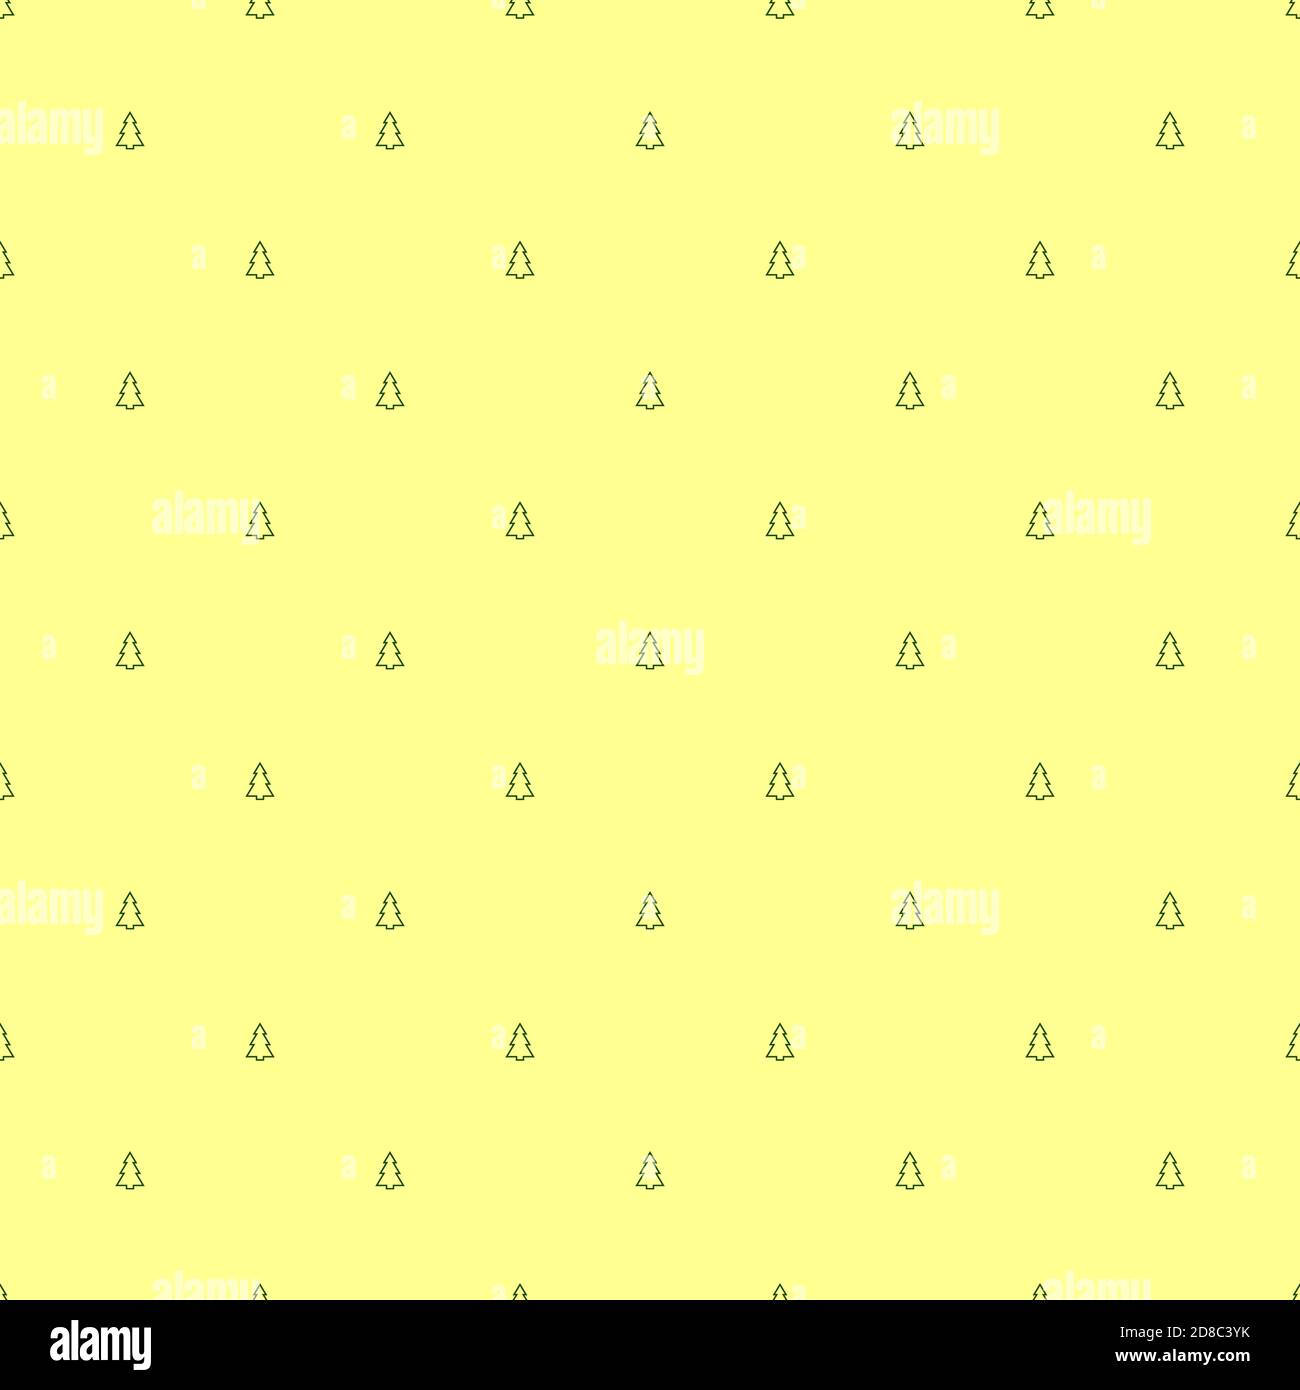 Small Green Outline Christmas Trees On A Pastel Yellow Background Minimalistic Geometric Symmetrical Seamless Pattern Vector For Christmas Wallpapers Gift Boxes Holiday Ribbons Cards Stock Vector Image Art Alamy Yellow crocs yellowaesthetic aesthetic vsco freetoedit vsco. https www alamy com small green outline christmas trees on a pastel yellow background minimalistic geometric symmetrical seamless pattern vector for christmas wallpapers gift boxes holiday ribbons cards image383811895 html